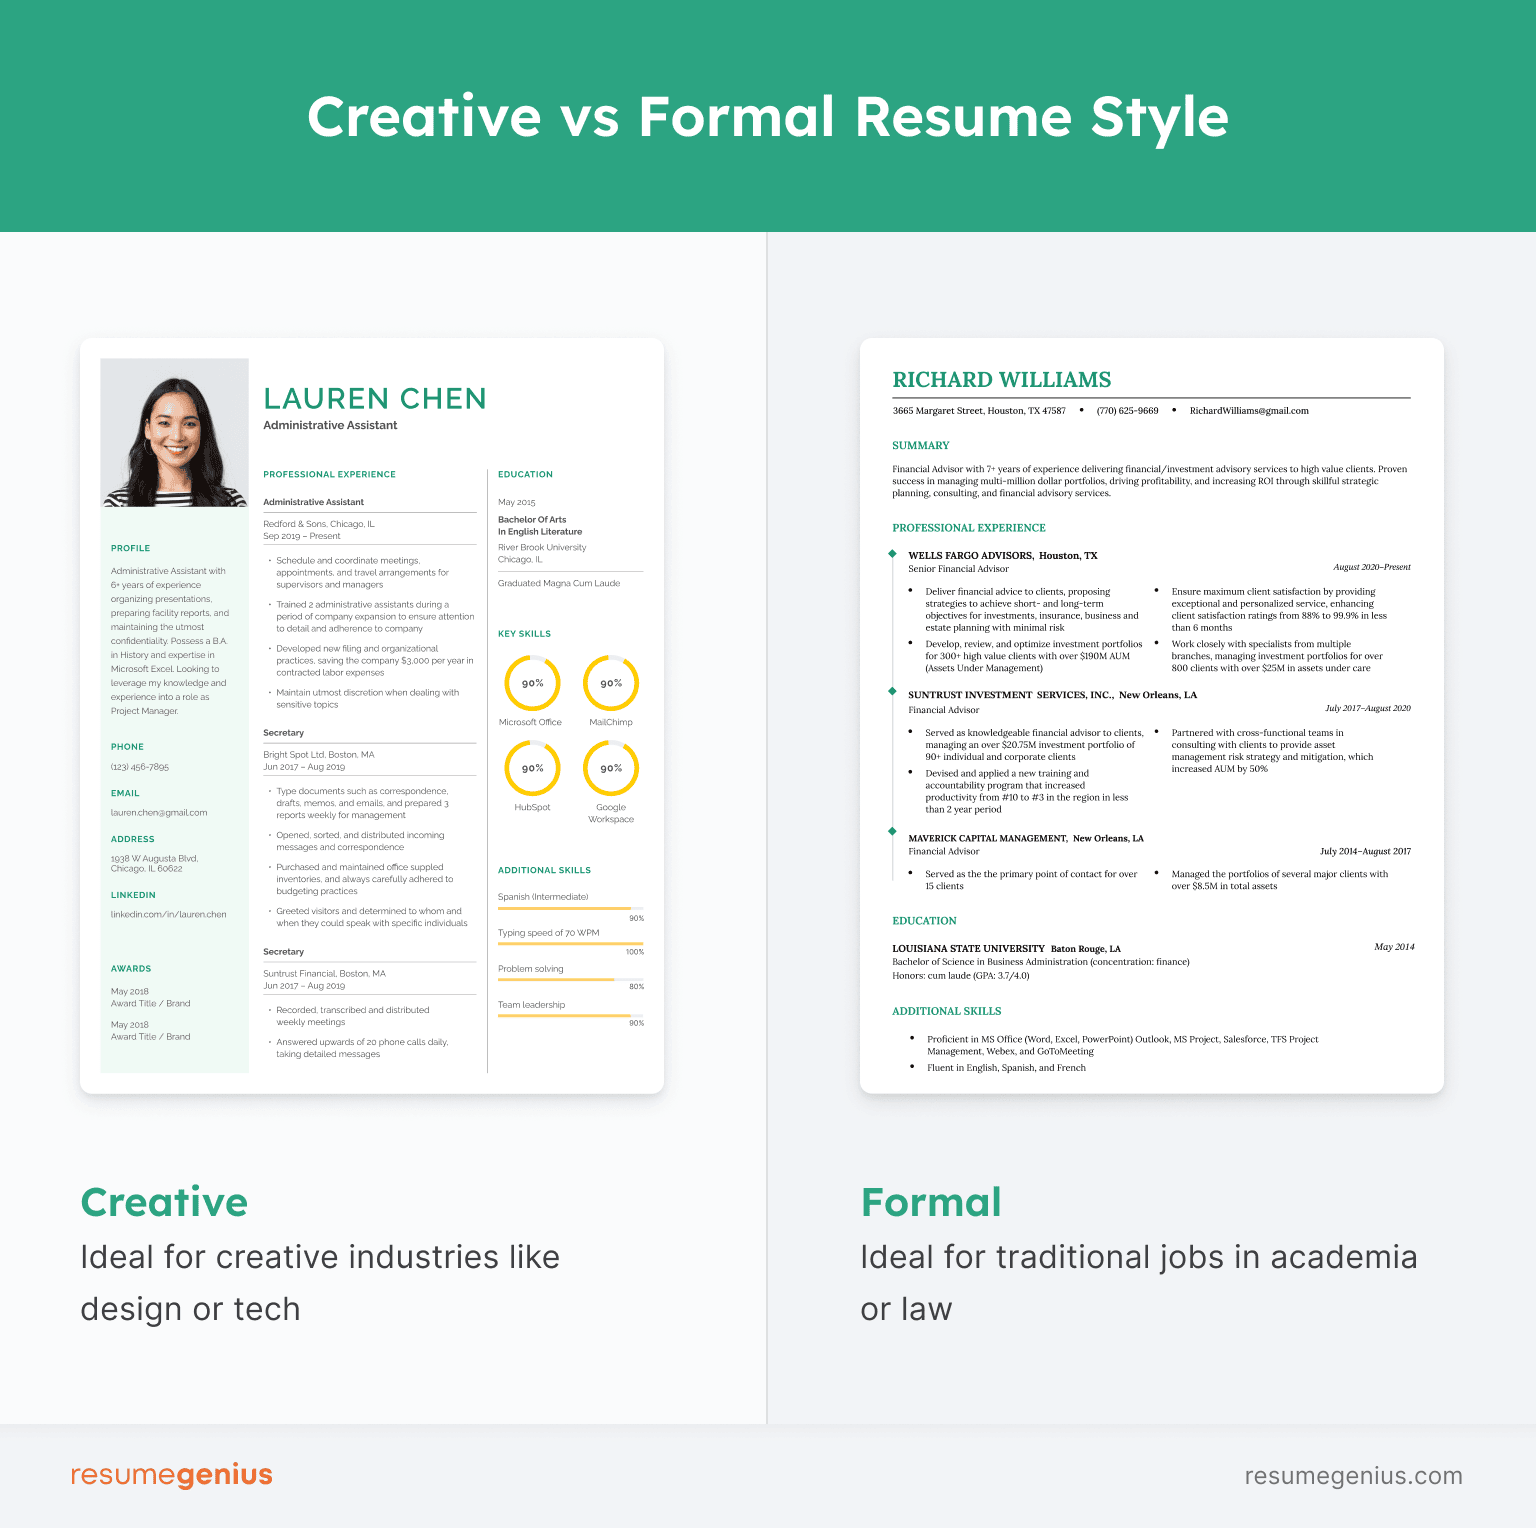 Example contrasting a creative resume with a formal resume. The creative resume has a photo of the applicant and many graphic details. The formal resume is very simple, with a clean layout.